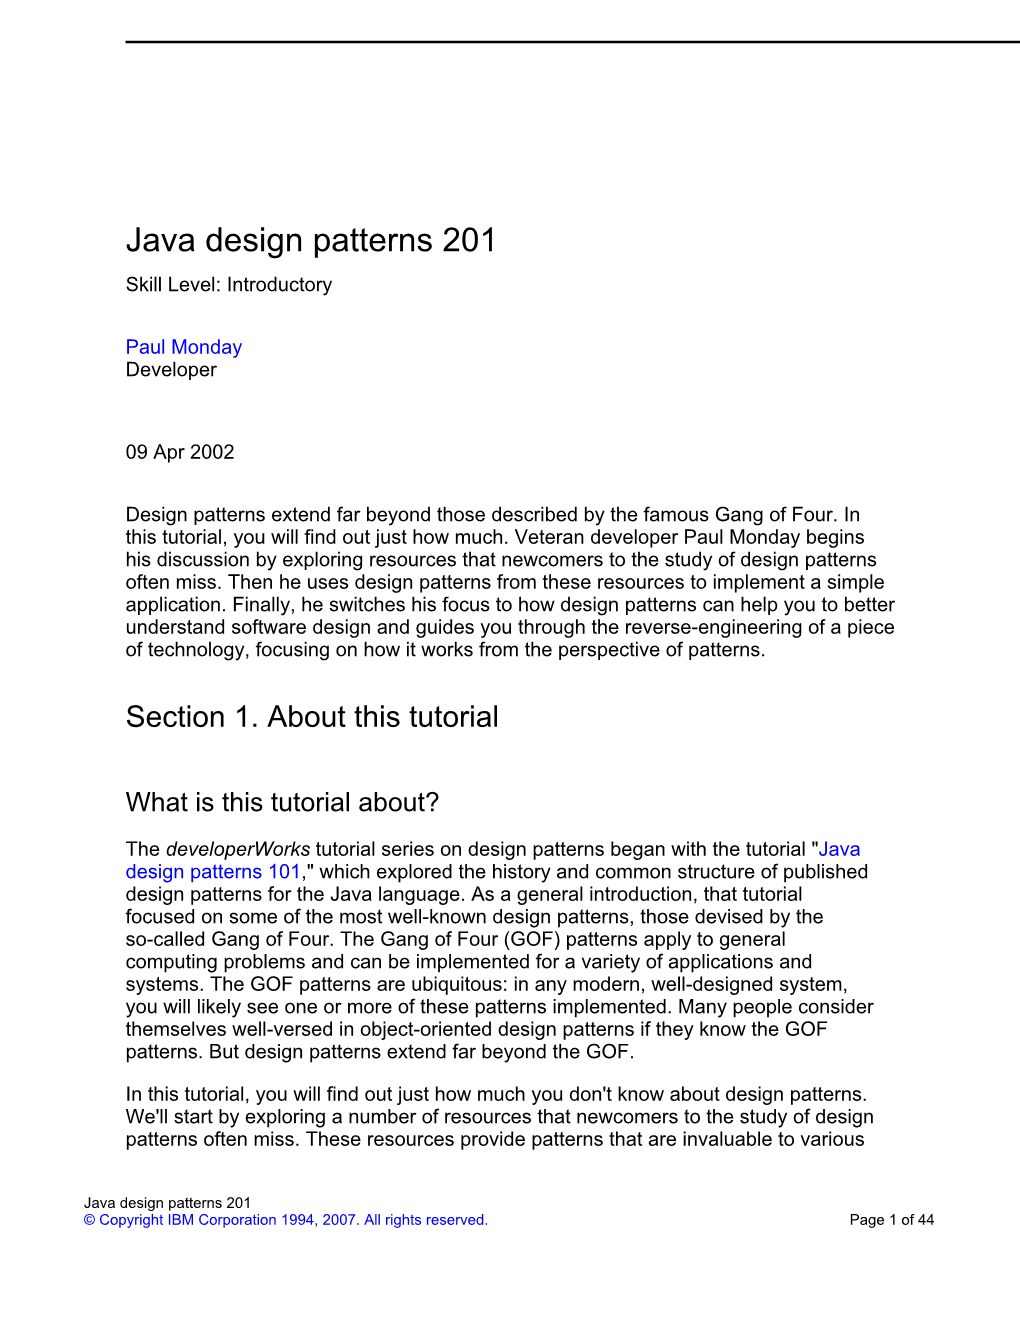 Java Design Patterns 201 Skill Level: Introductory